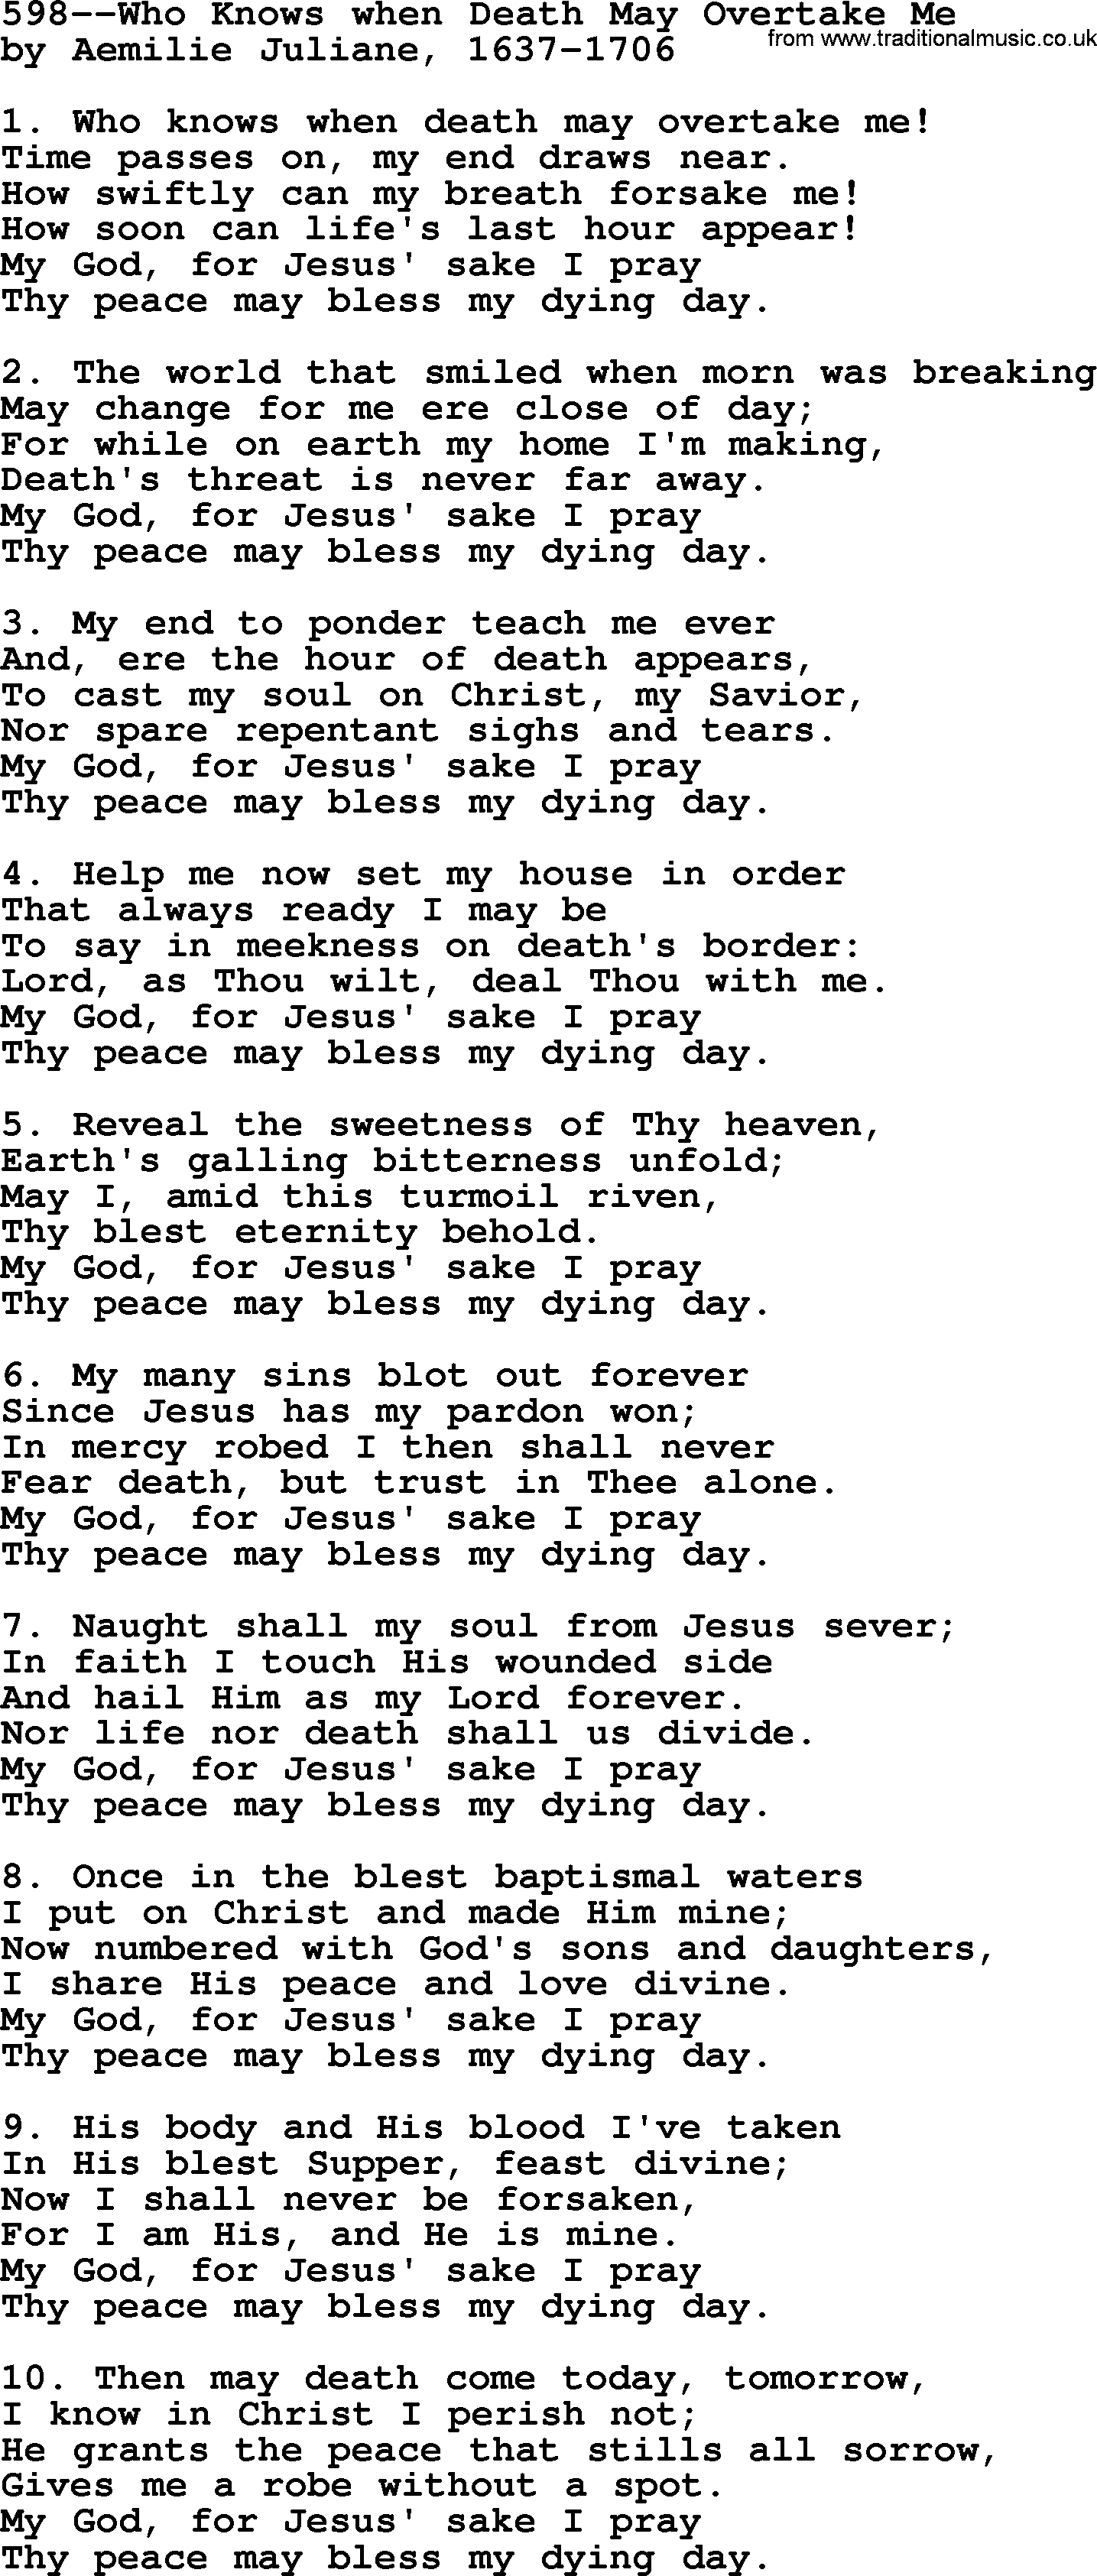 Lutheran Hymn: 598--Who Knows when Death May Overtake Me.txt lyrics with PDF